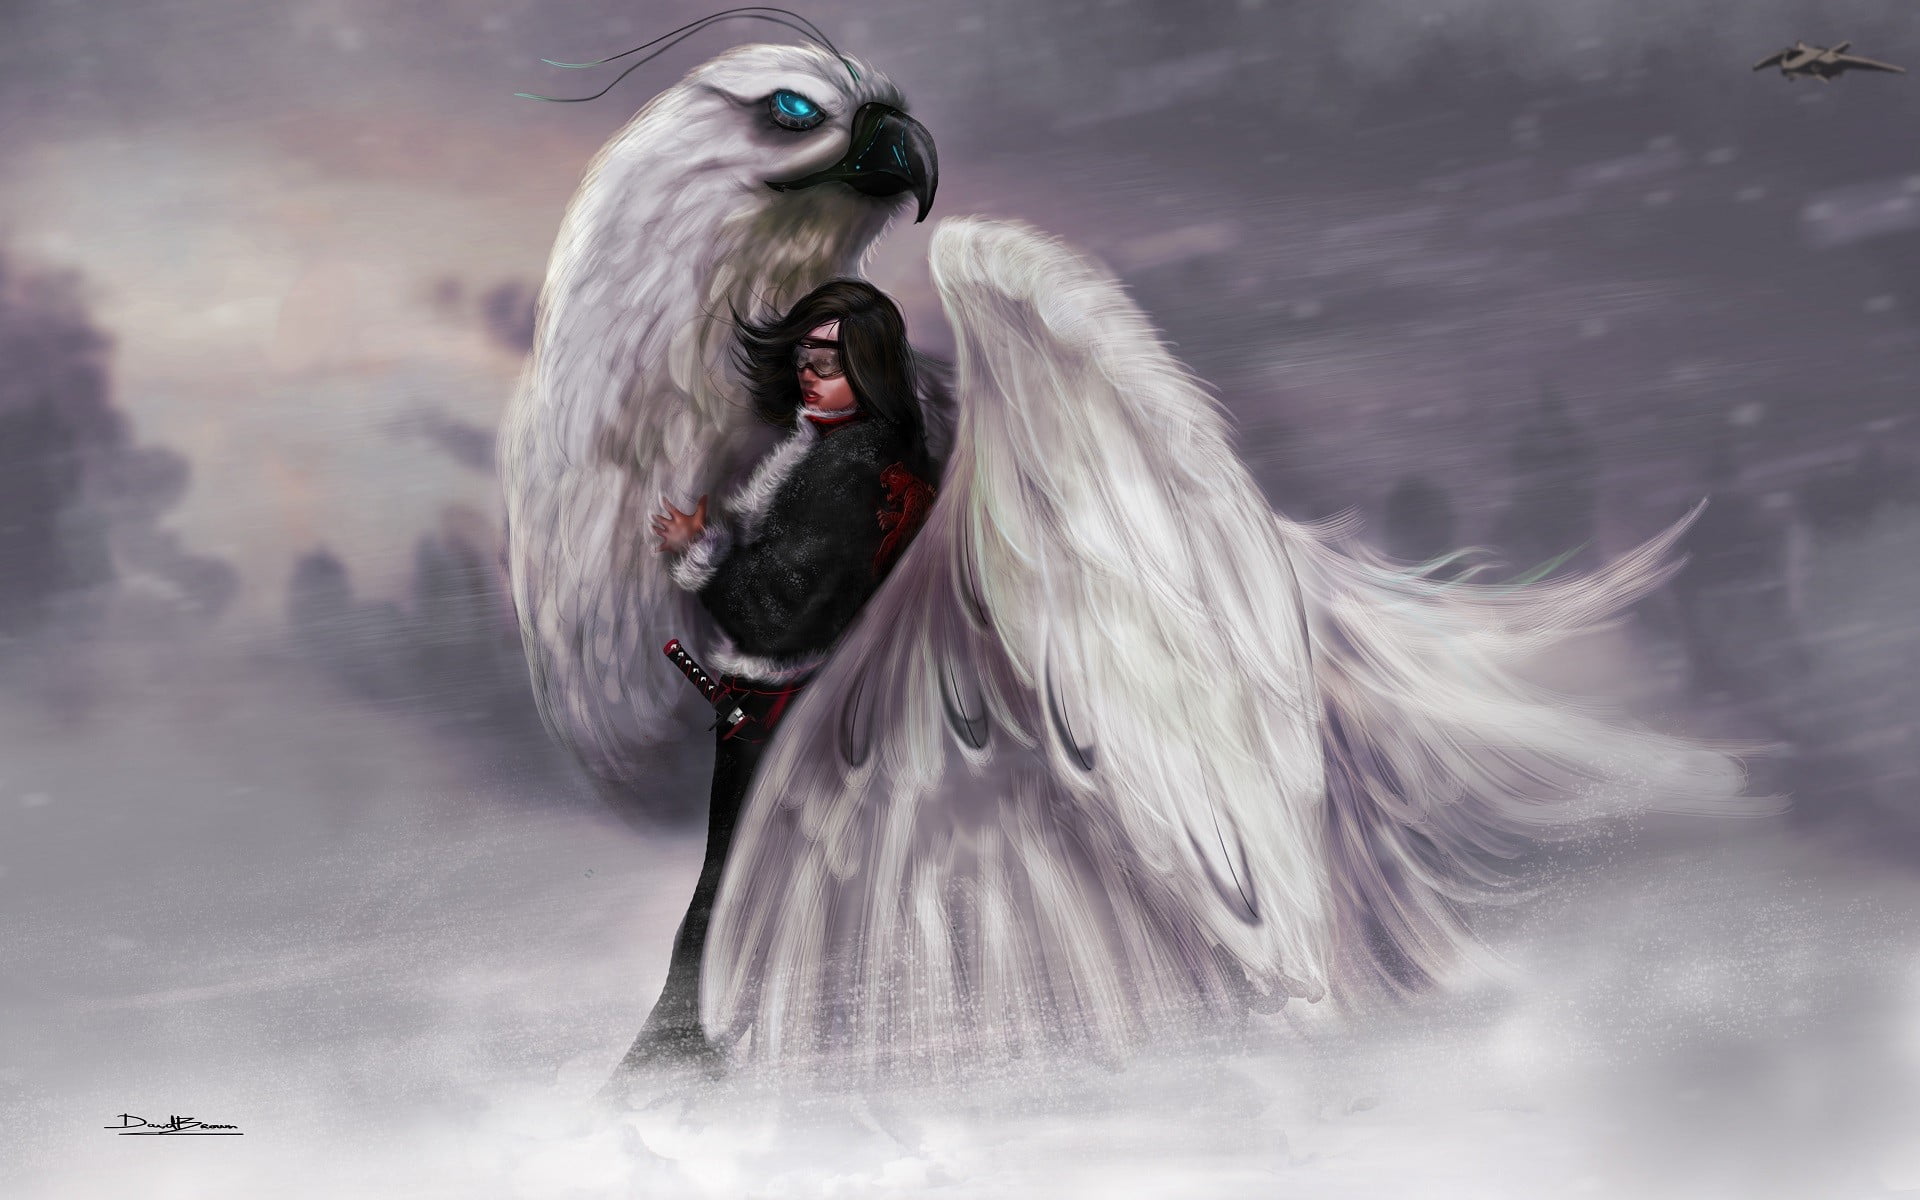 Male Anime Character And White Eagle Wallpaper Fantasy Art Griffins